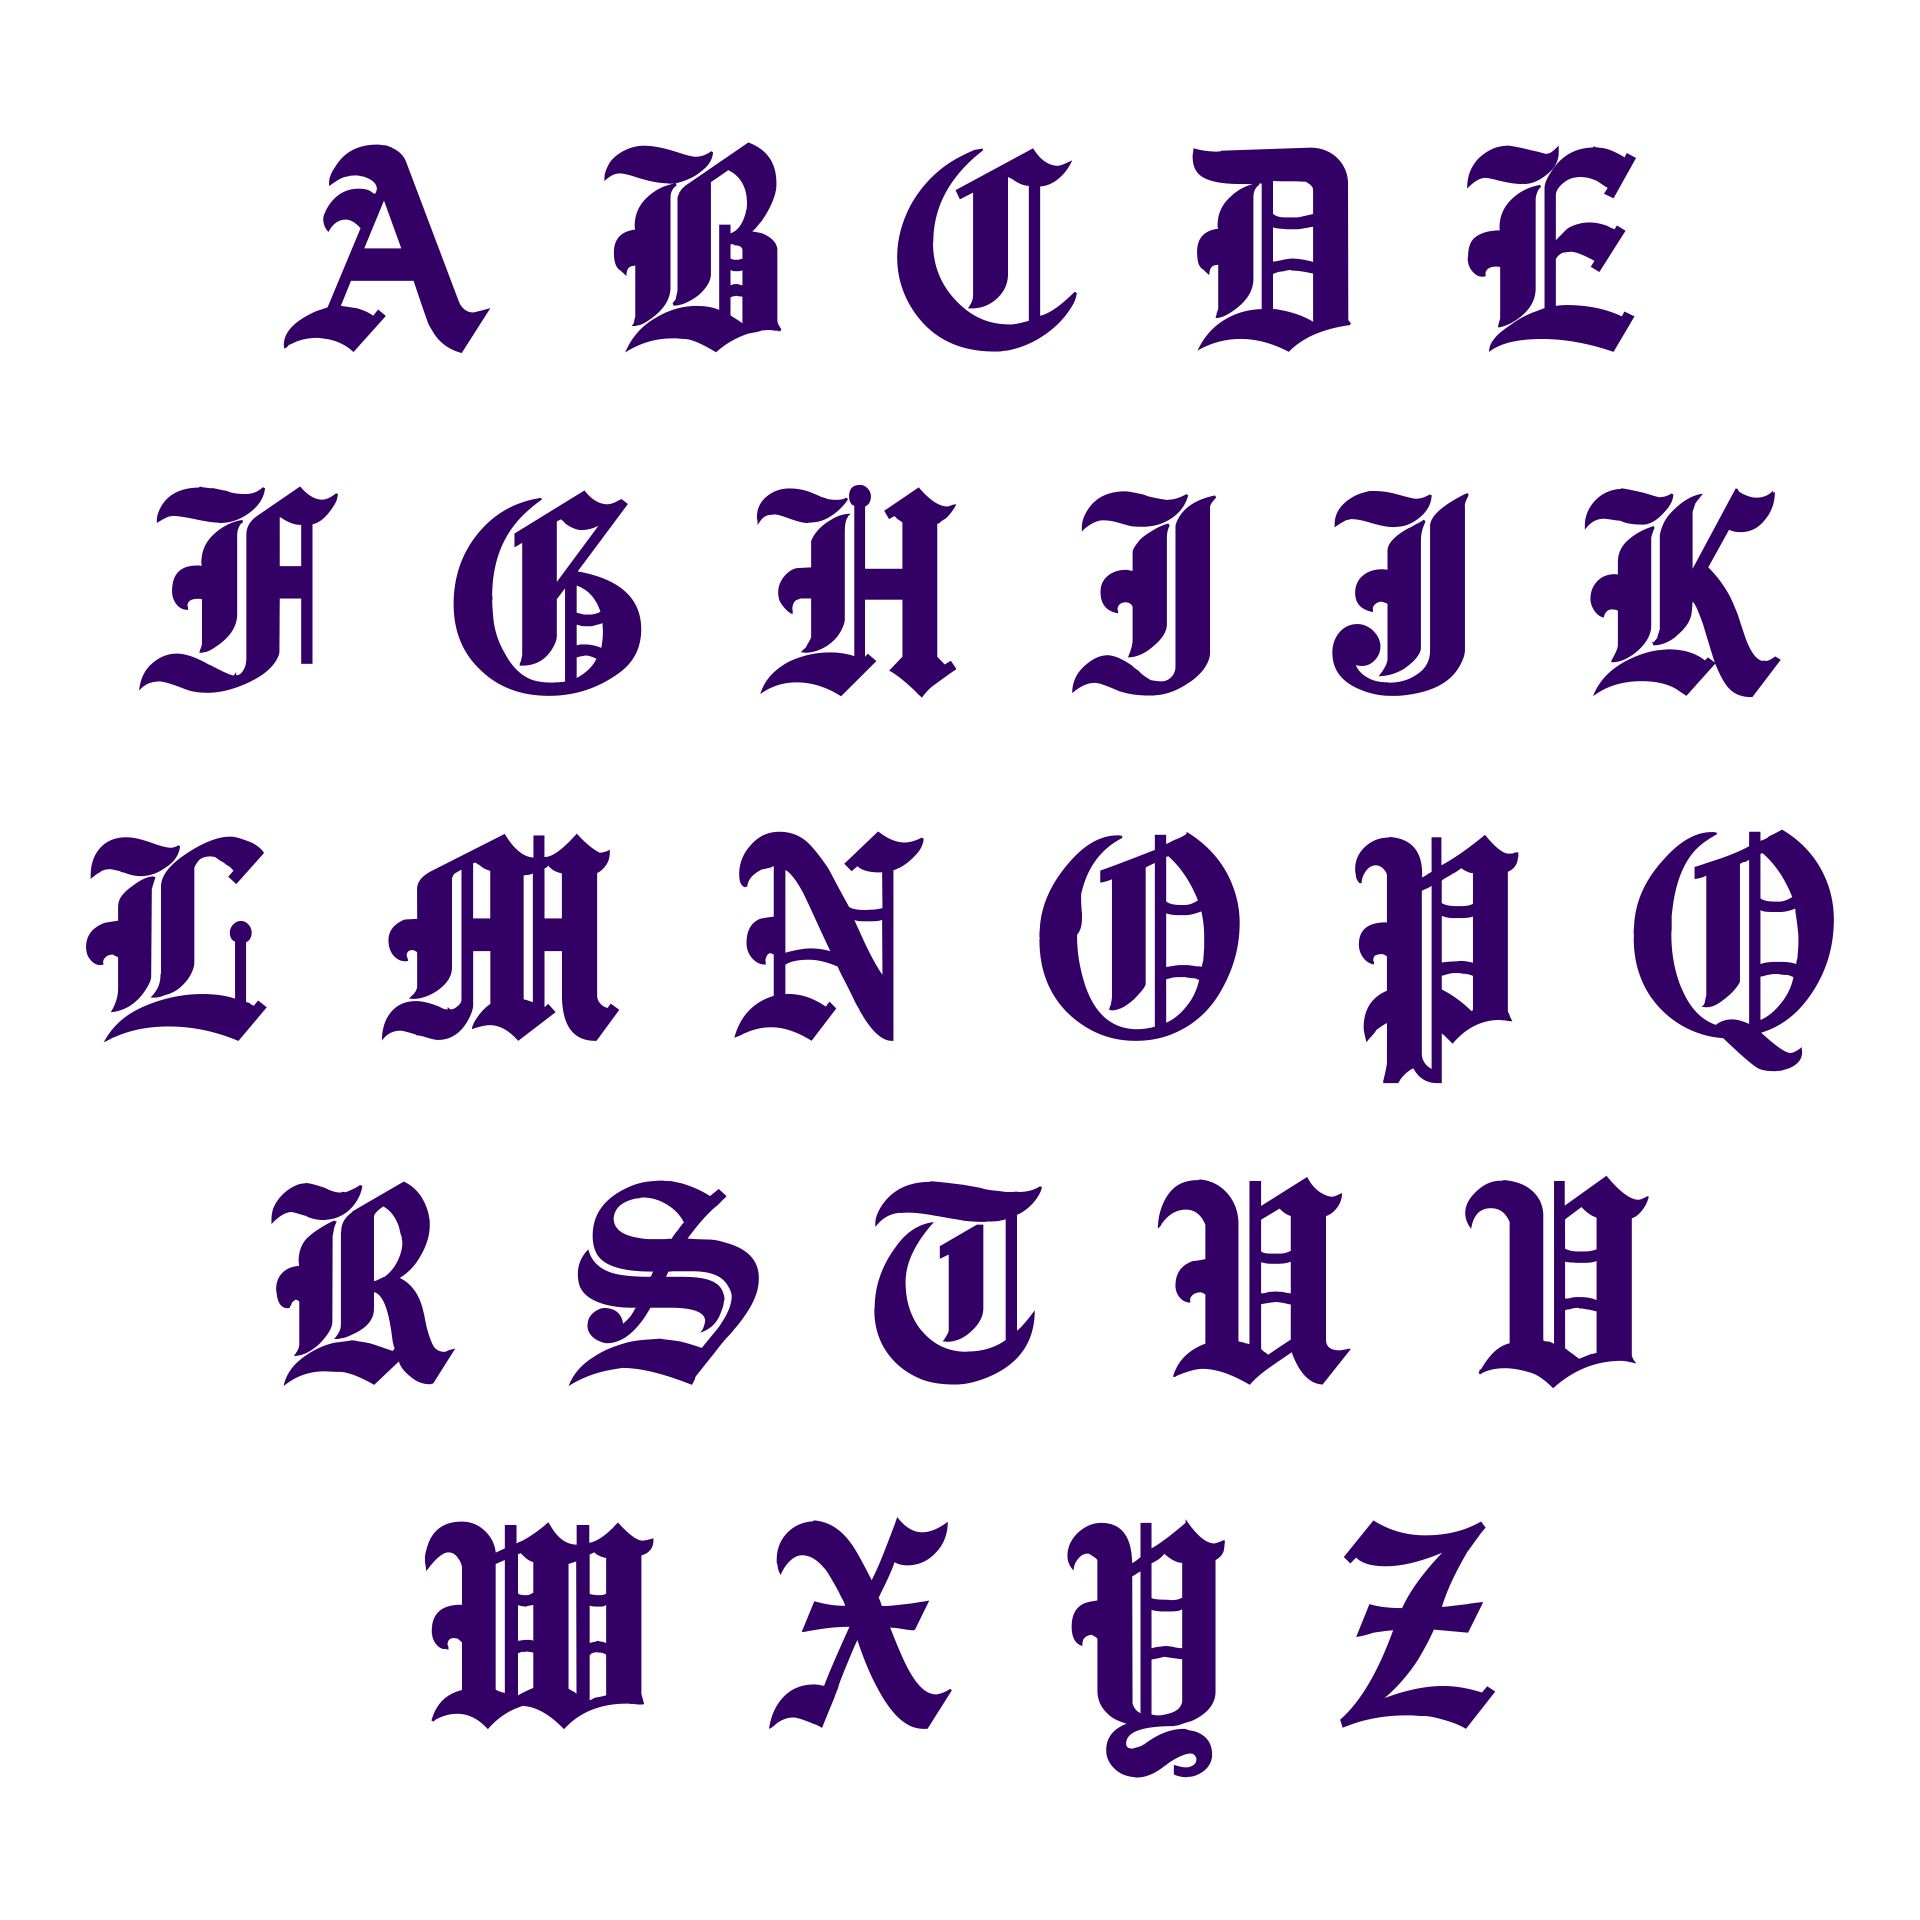 Printable Old English Letters Alphabet A-Z_83718